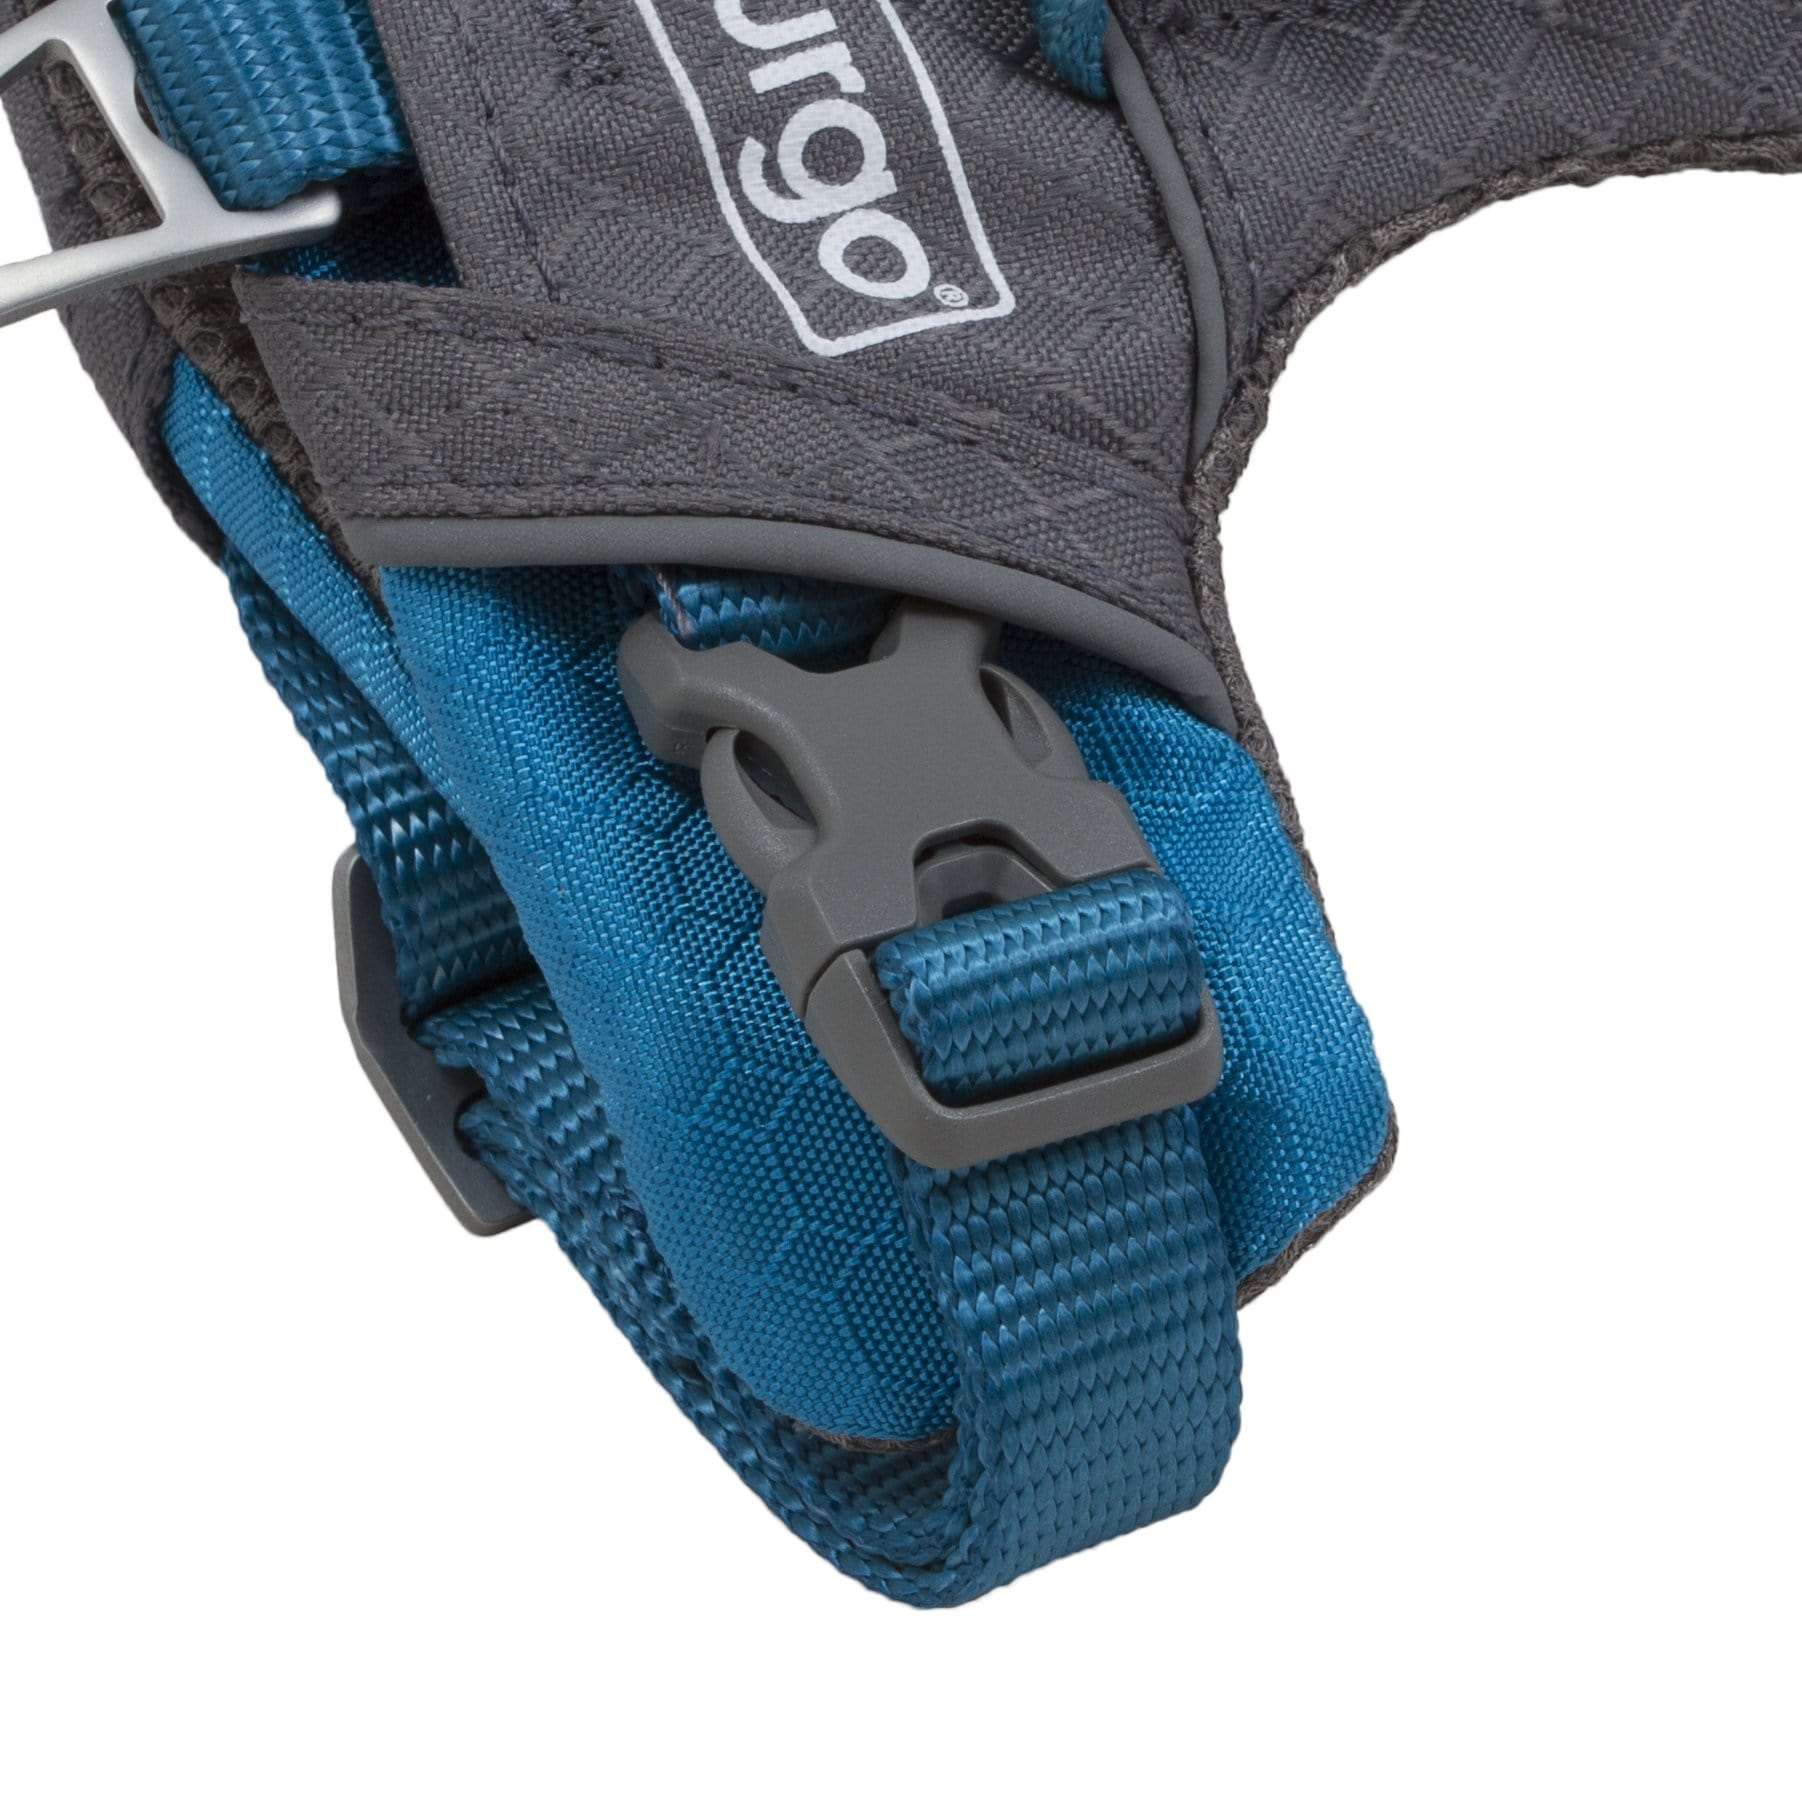 Quick release buckle on the Kurgo Journey Air Harness